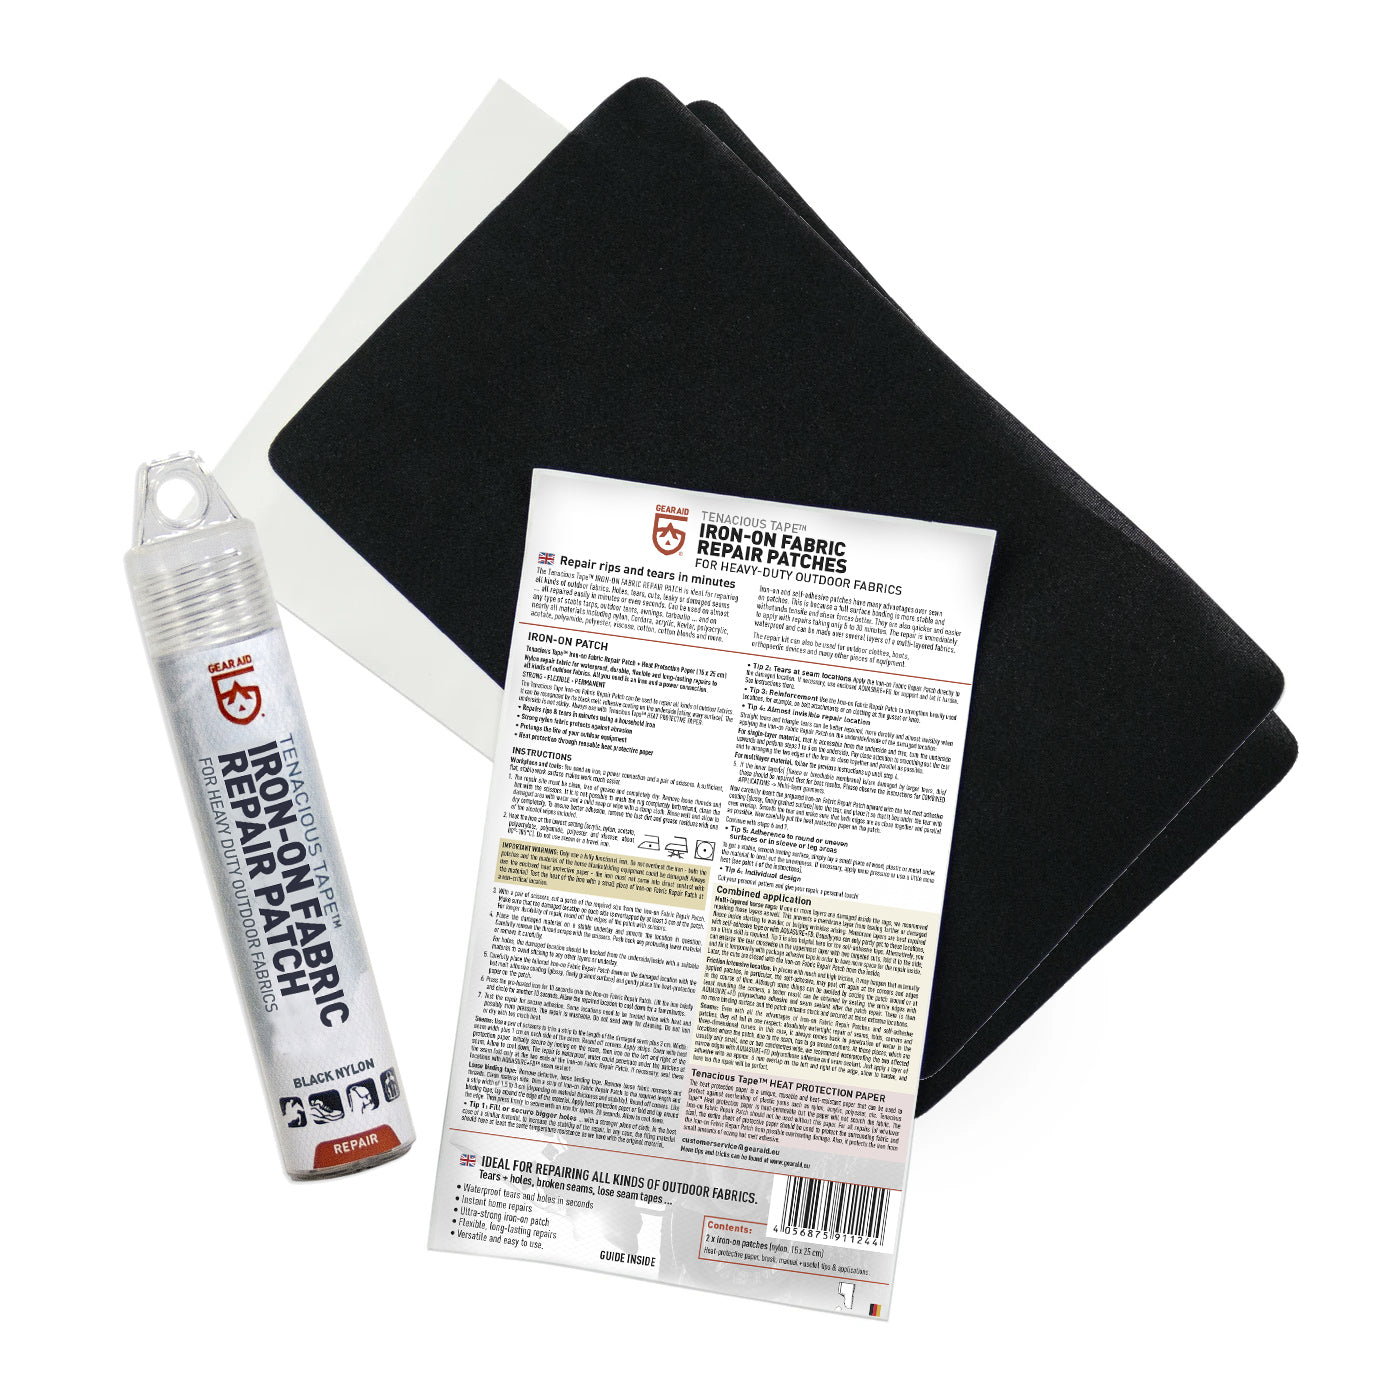 Tear-Aid Fabric Repair Patch Kit for Acrylic Fabric 3x12